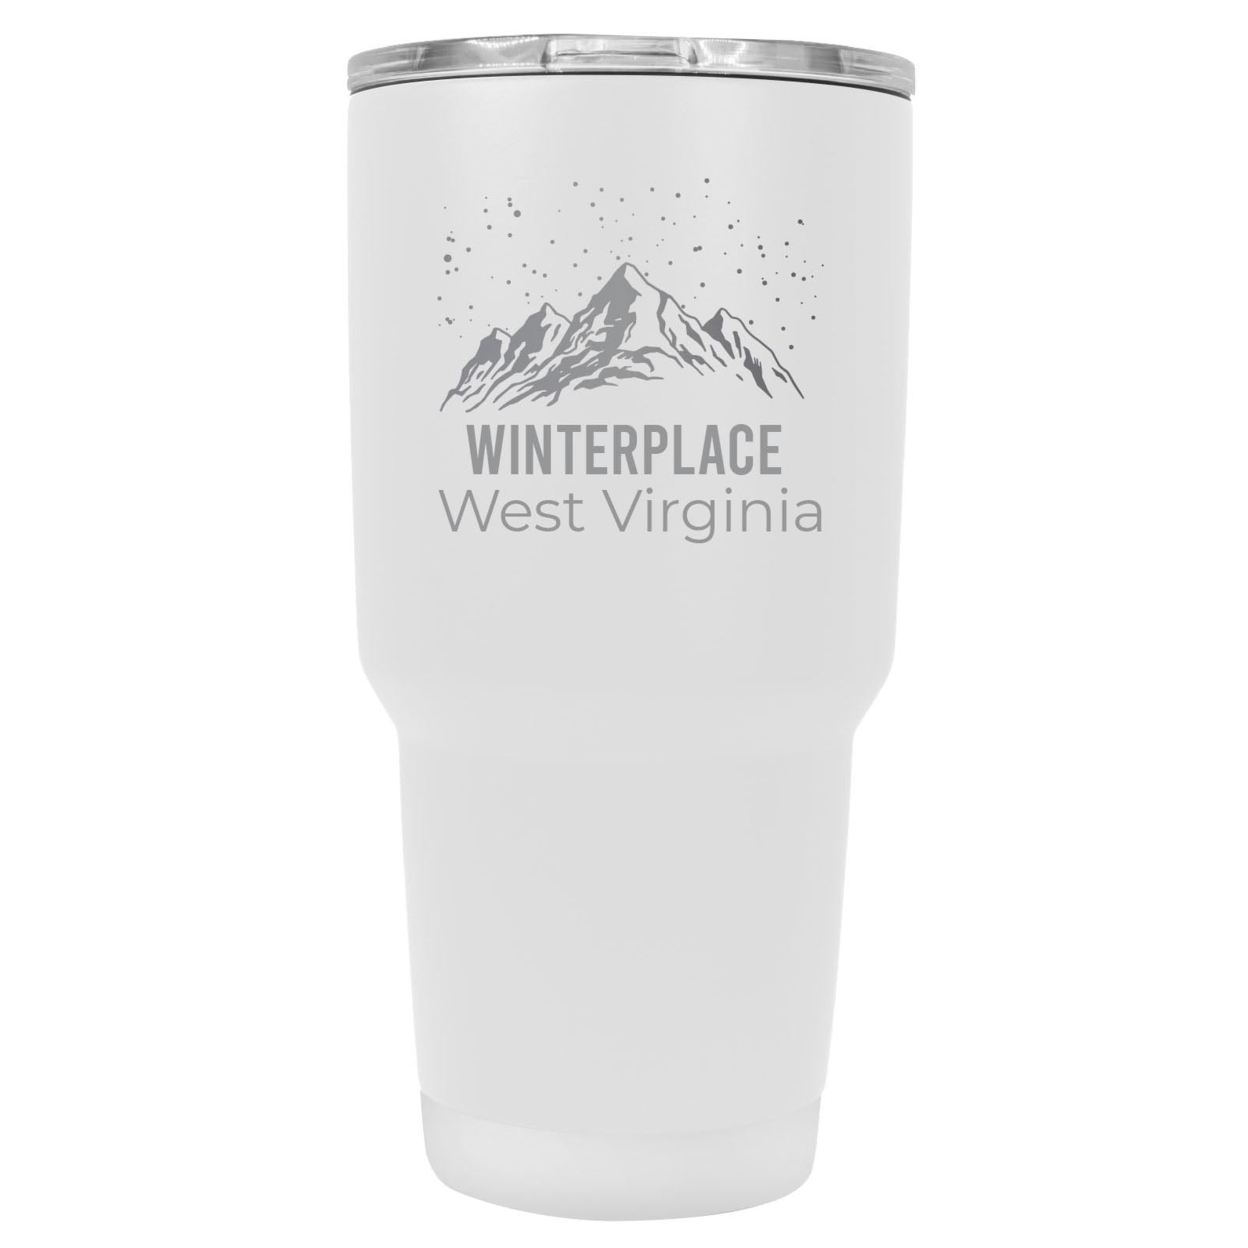 Winterplace West Virginia Ski Snowboard Winter Souvenir Laser Engraved 24 Oz Insulated Stainless Steel Tumbler - Coral